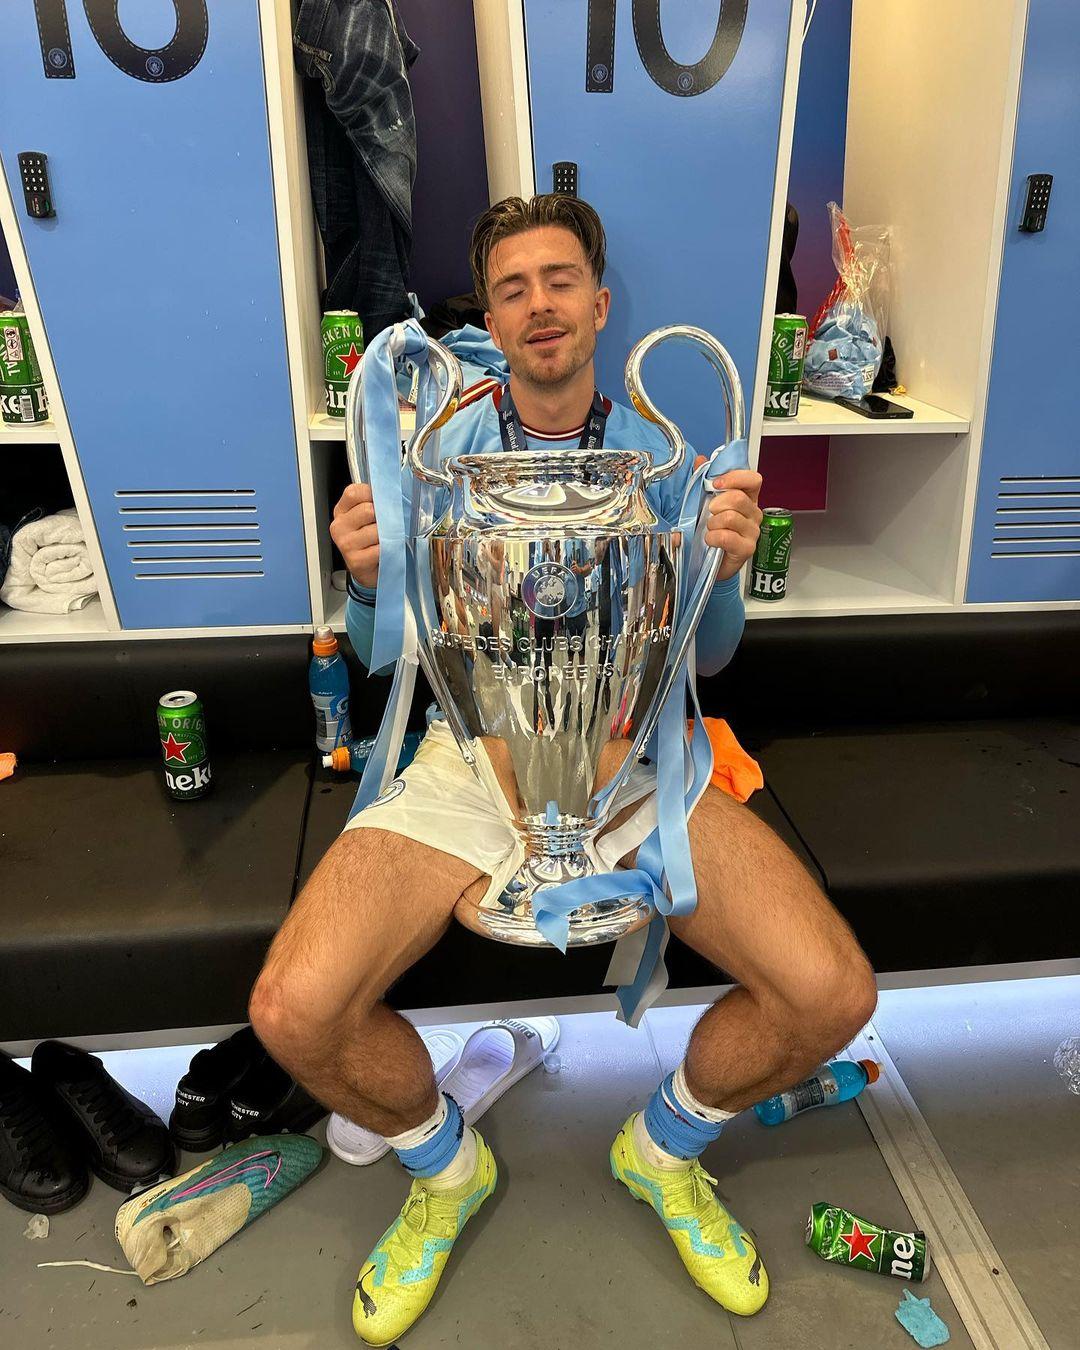 The champions league…. The treble 😢 the stuff I couldn’t even dream of. Wow 🏆🏆🏆